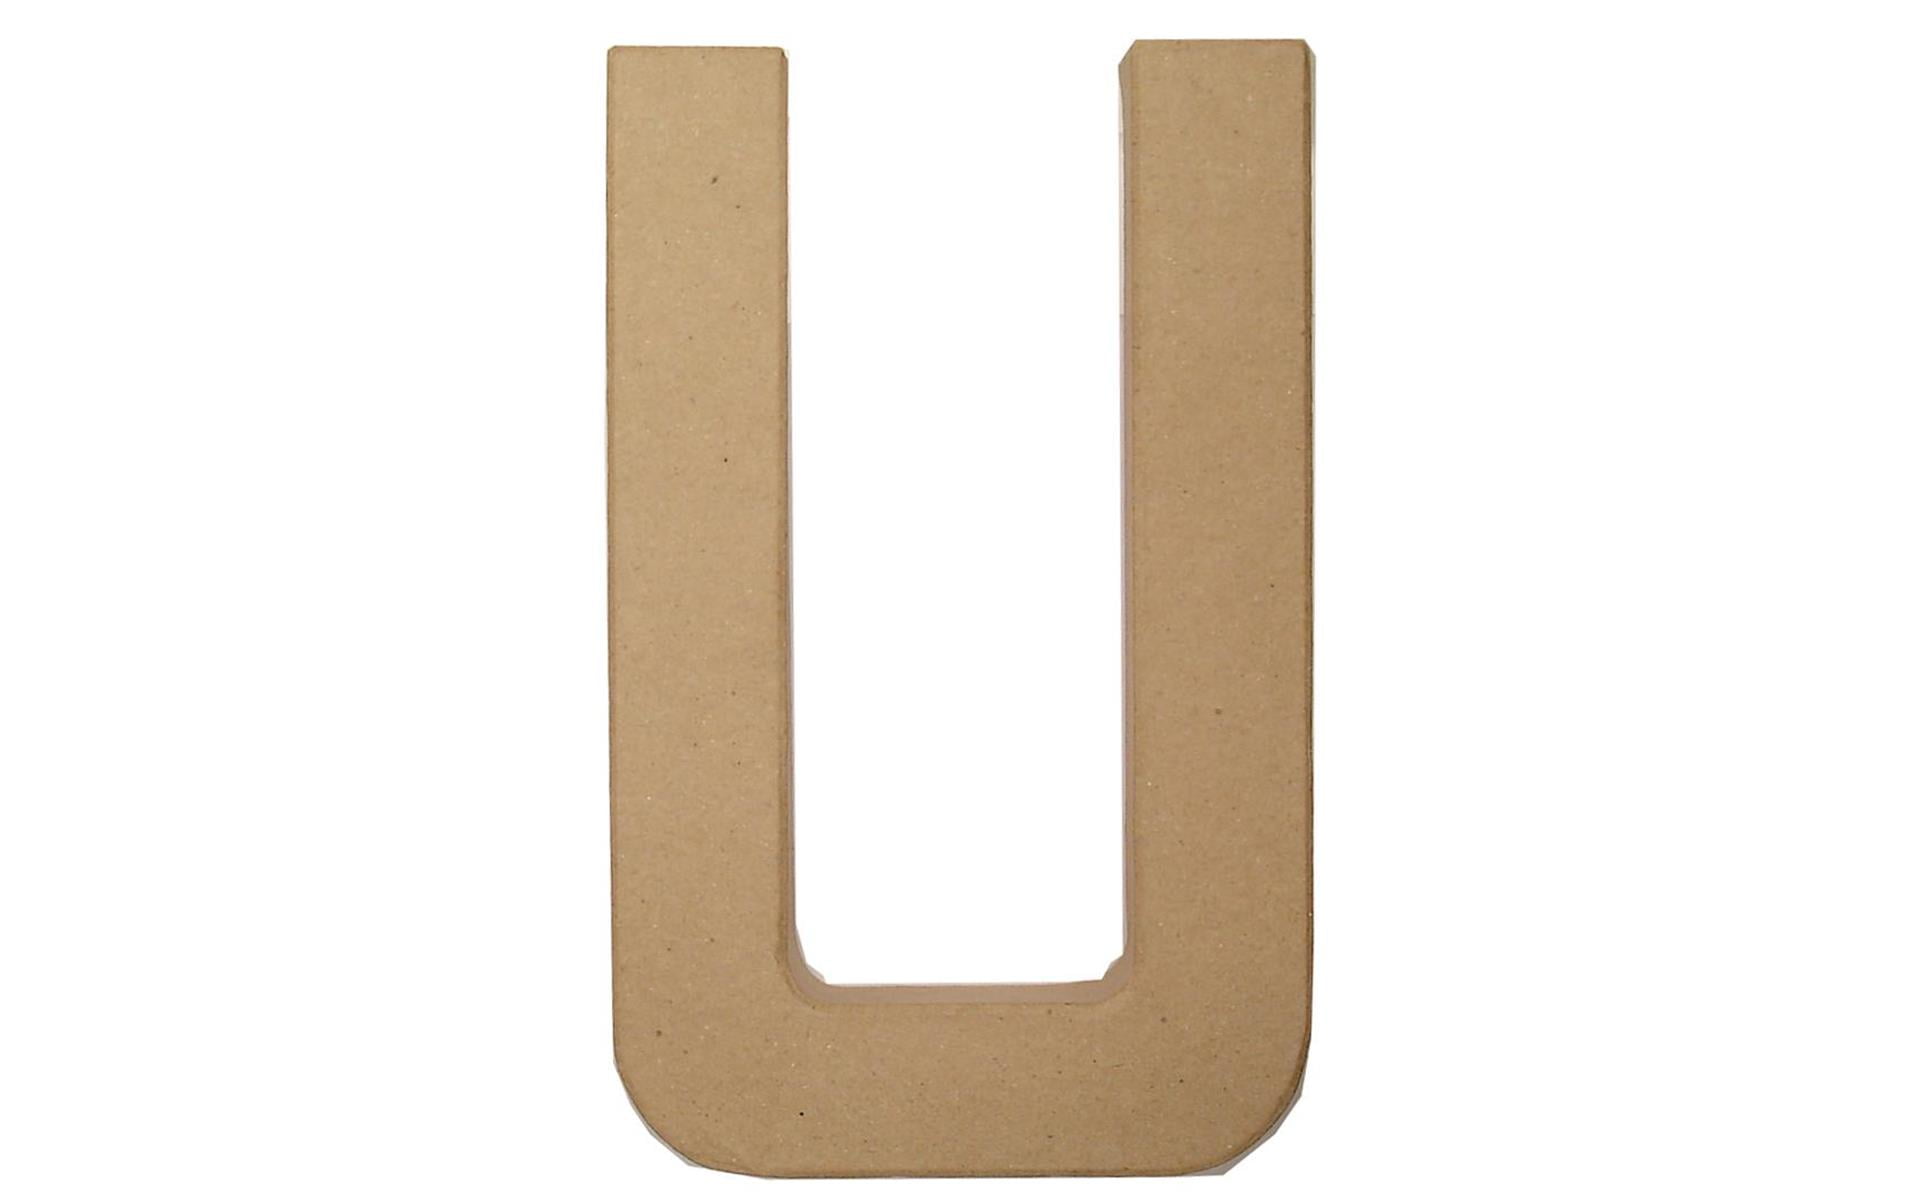  SEWACC 15 pcs wooden numbers paper mache numbers